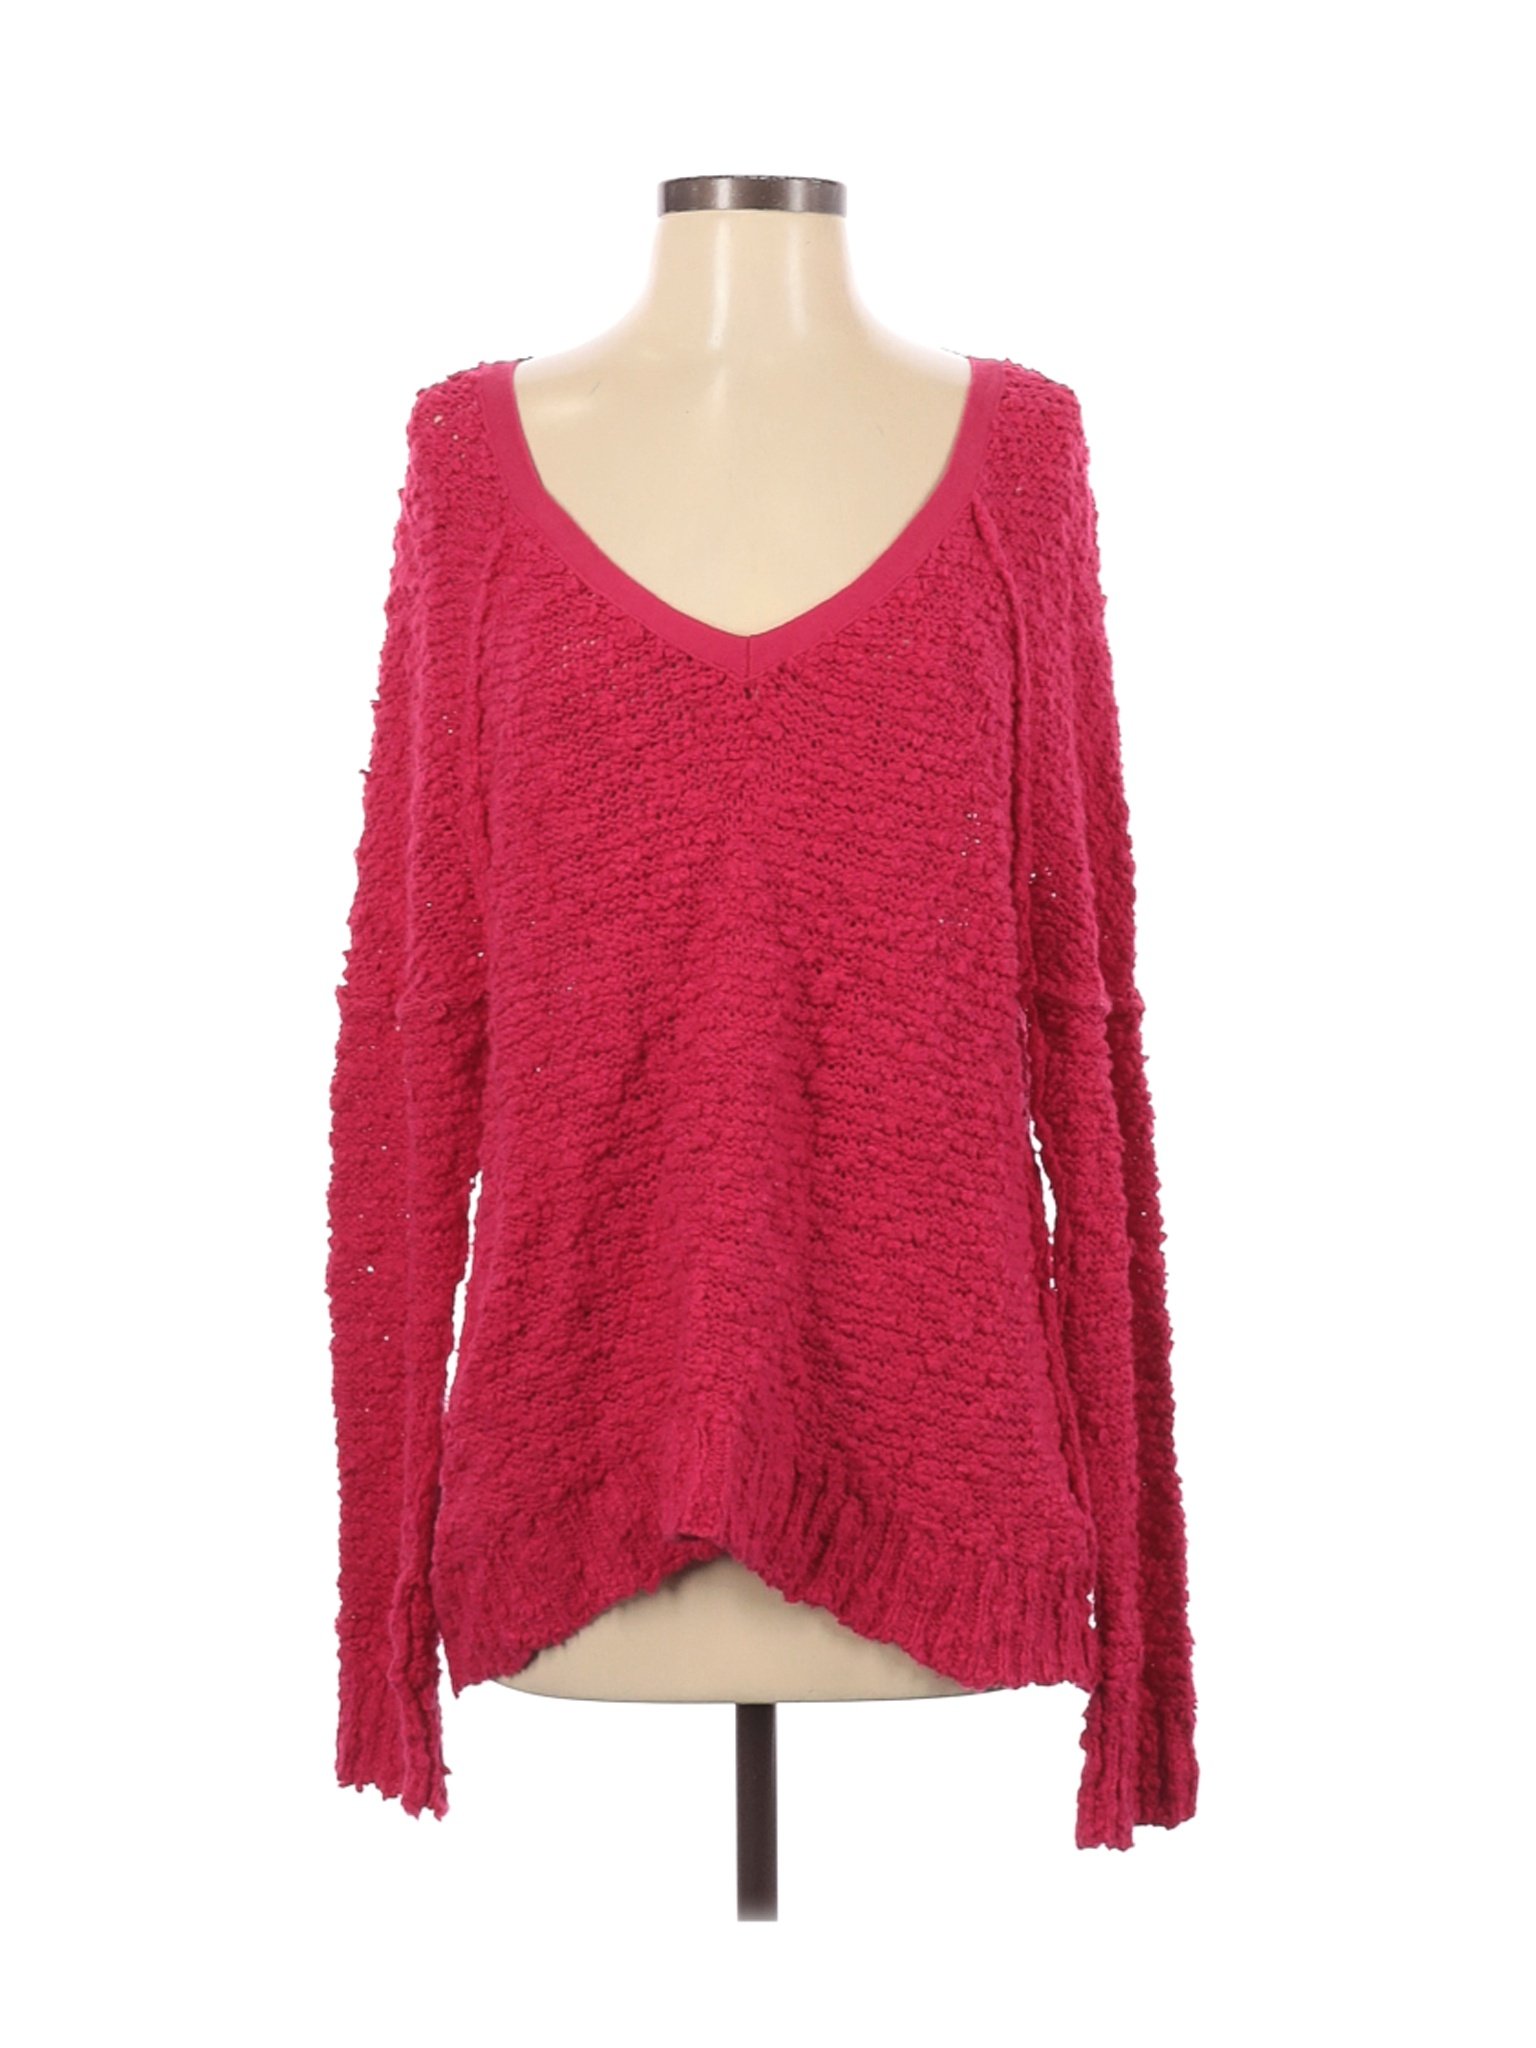 Free People Women Red Pullover Sweater S | eBay